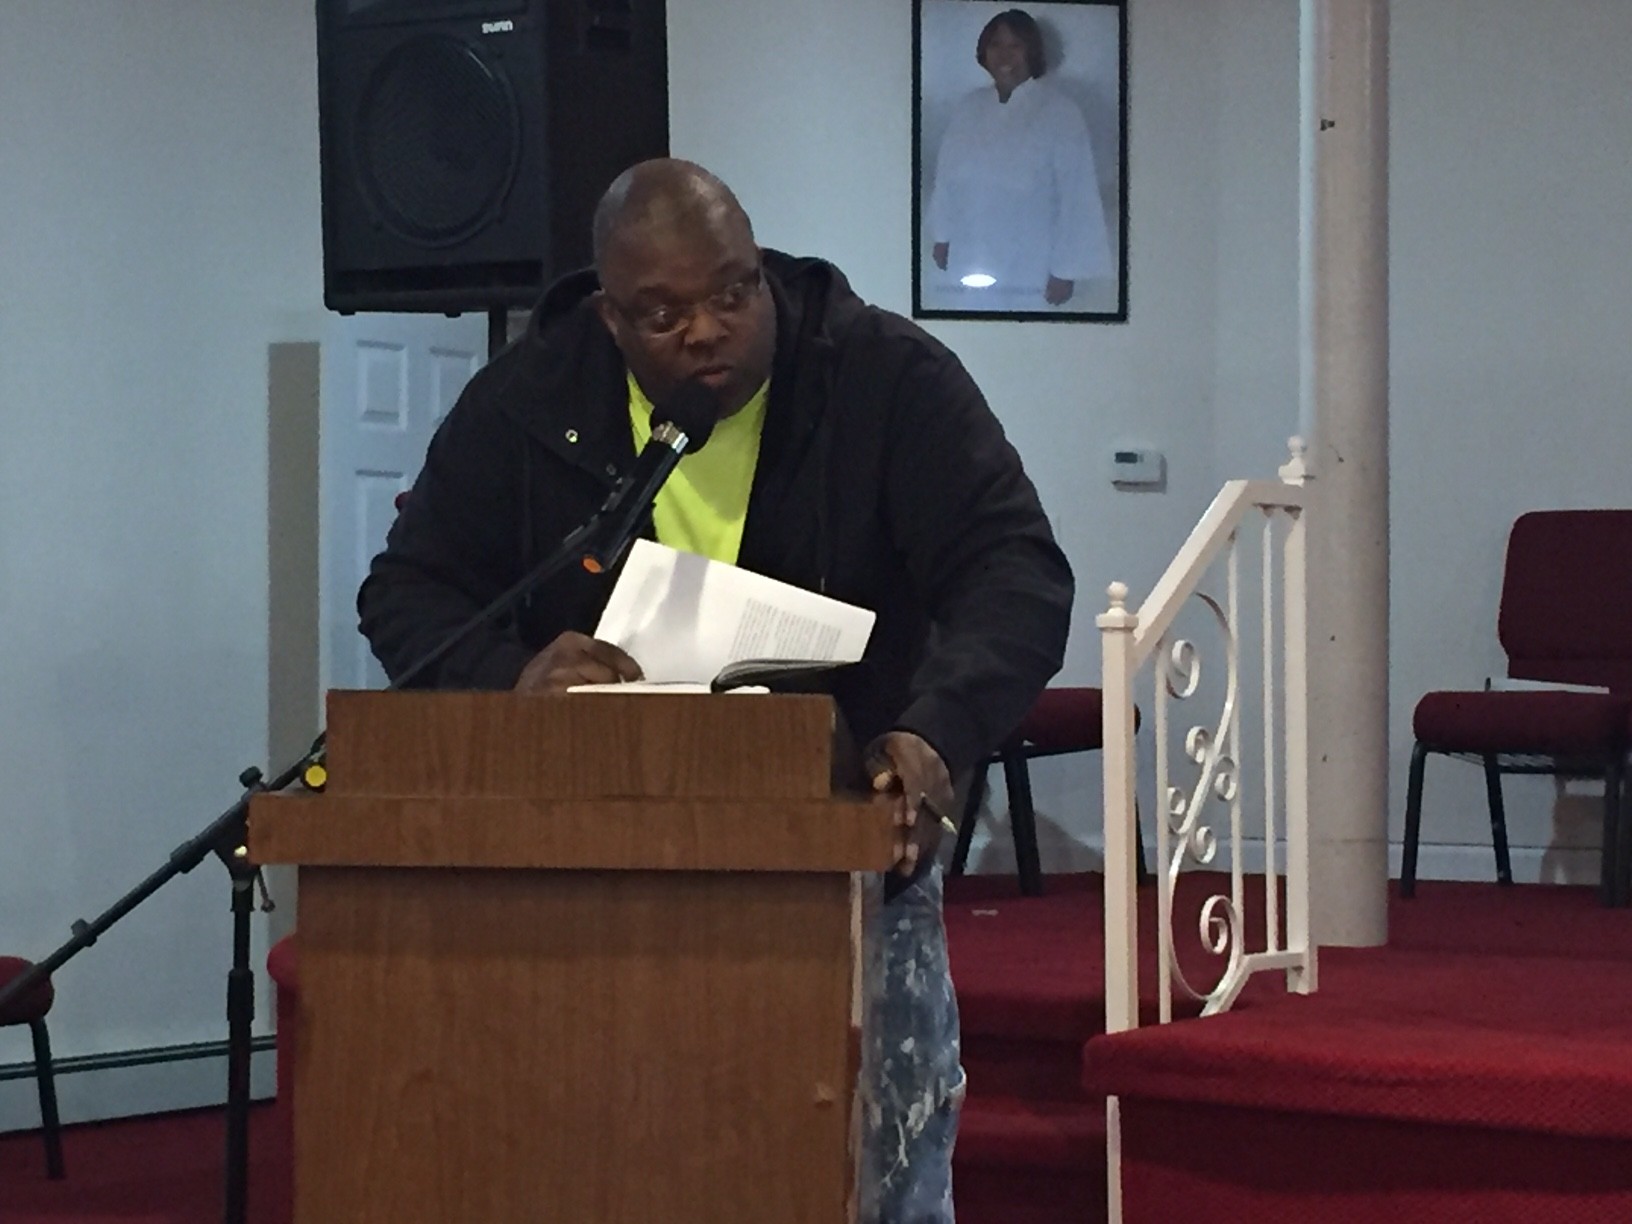 James Hutchinson, a former Channel Park resident, said the lack of remediation in the public housing devel-opment after Sandy is “disrespectful.”